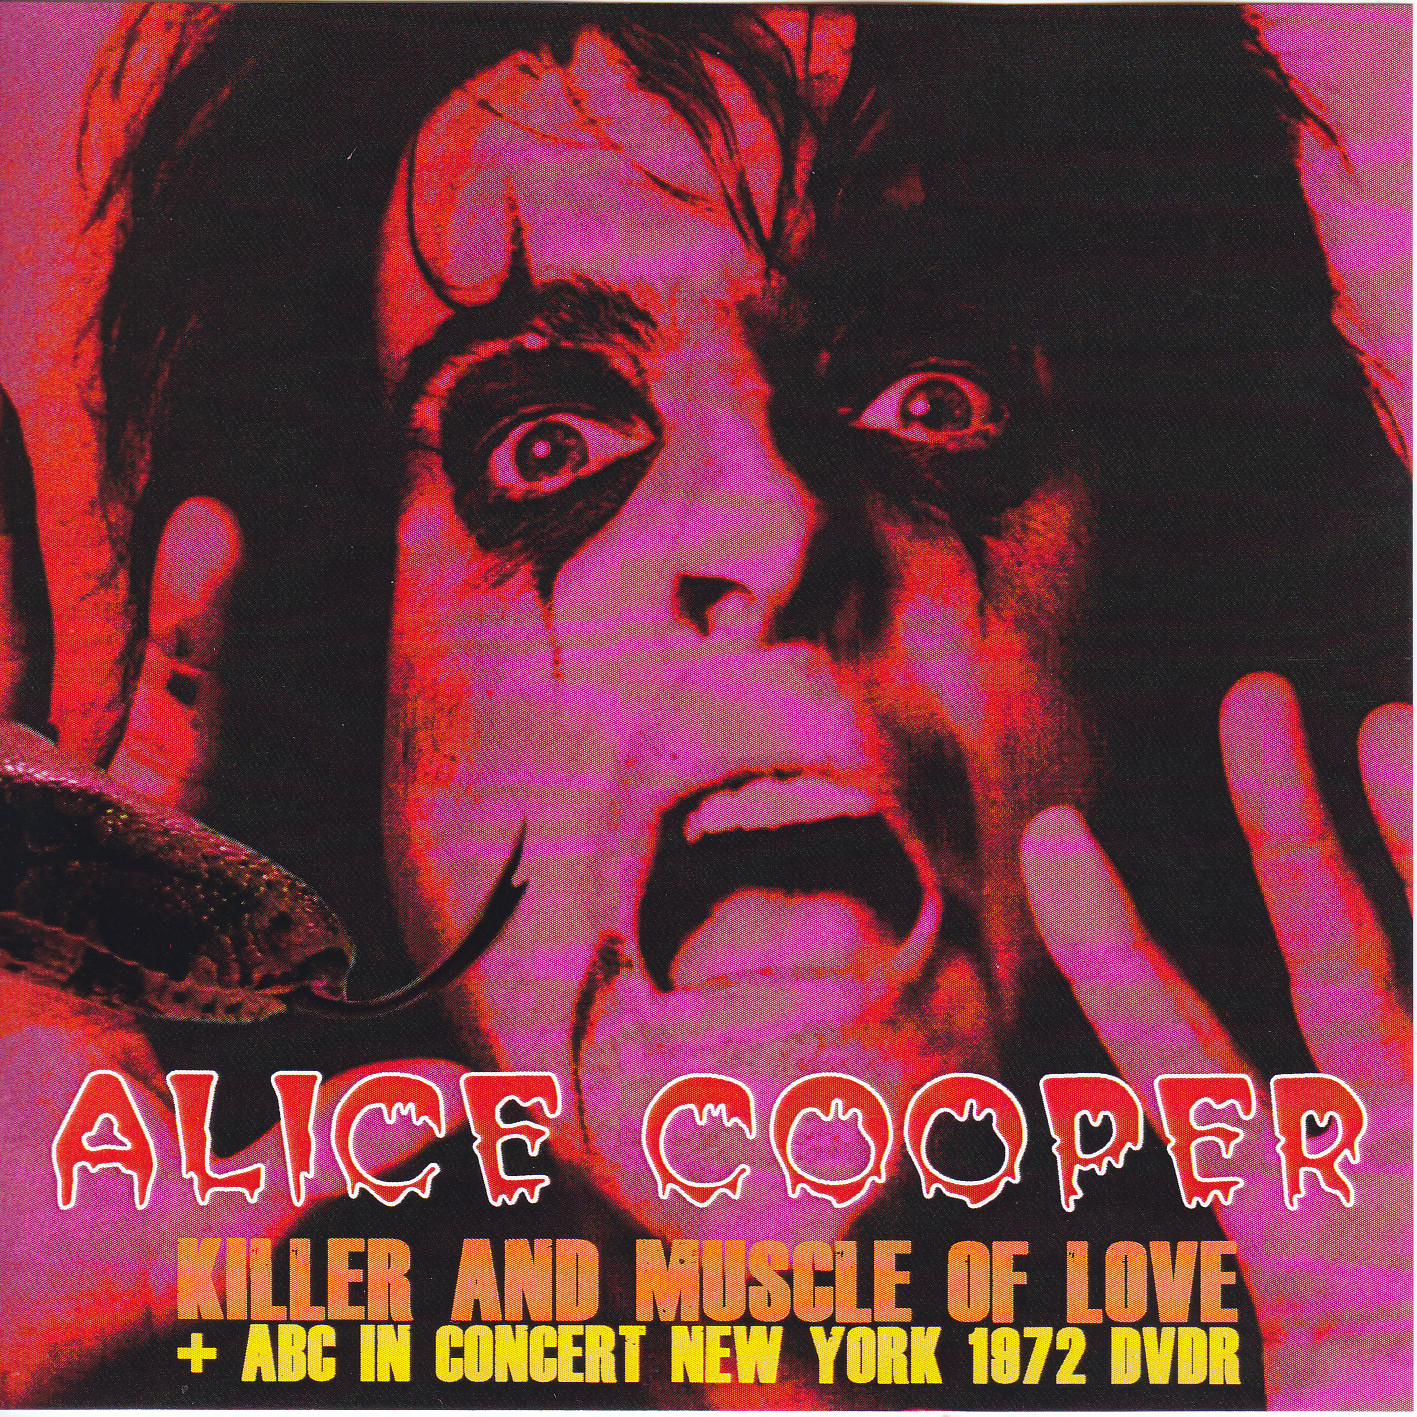 Alice Cooper / Killer And Muscle of Love + NY 1972 / 1CDR+1DVDR